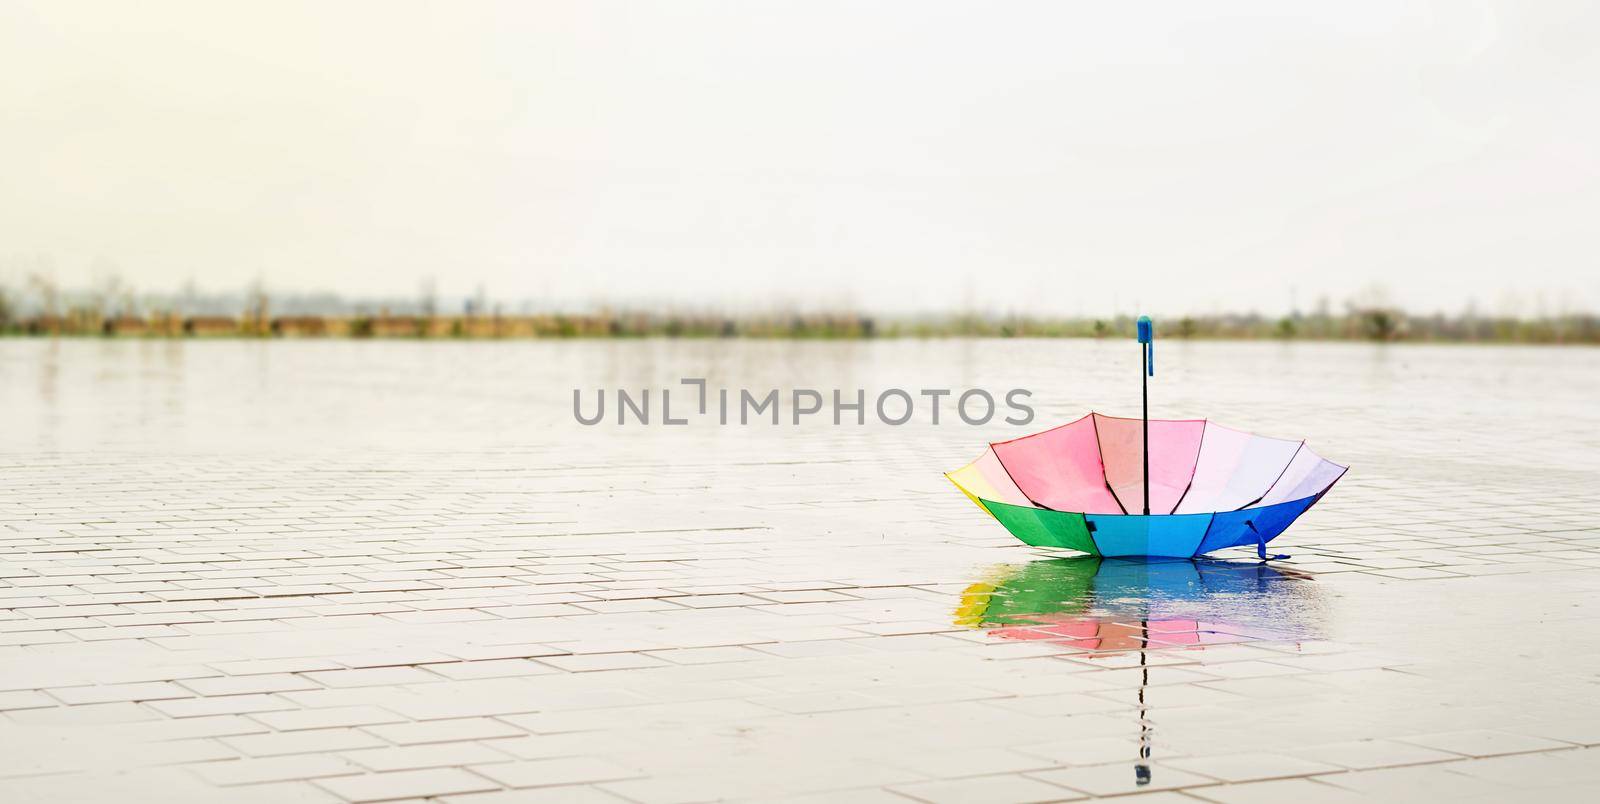 Unused colorful umbrella lying upside down on ground being rained upon. Rainbow colored umbrella lying in puddles on the wet street ground. Copy space